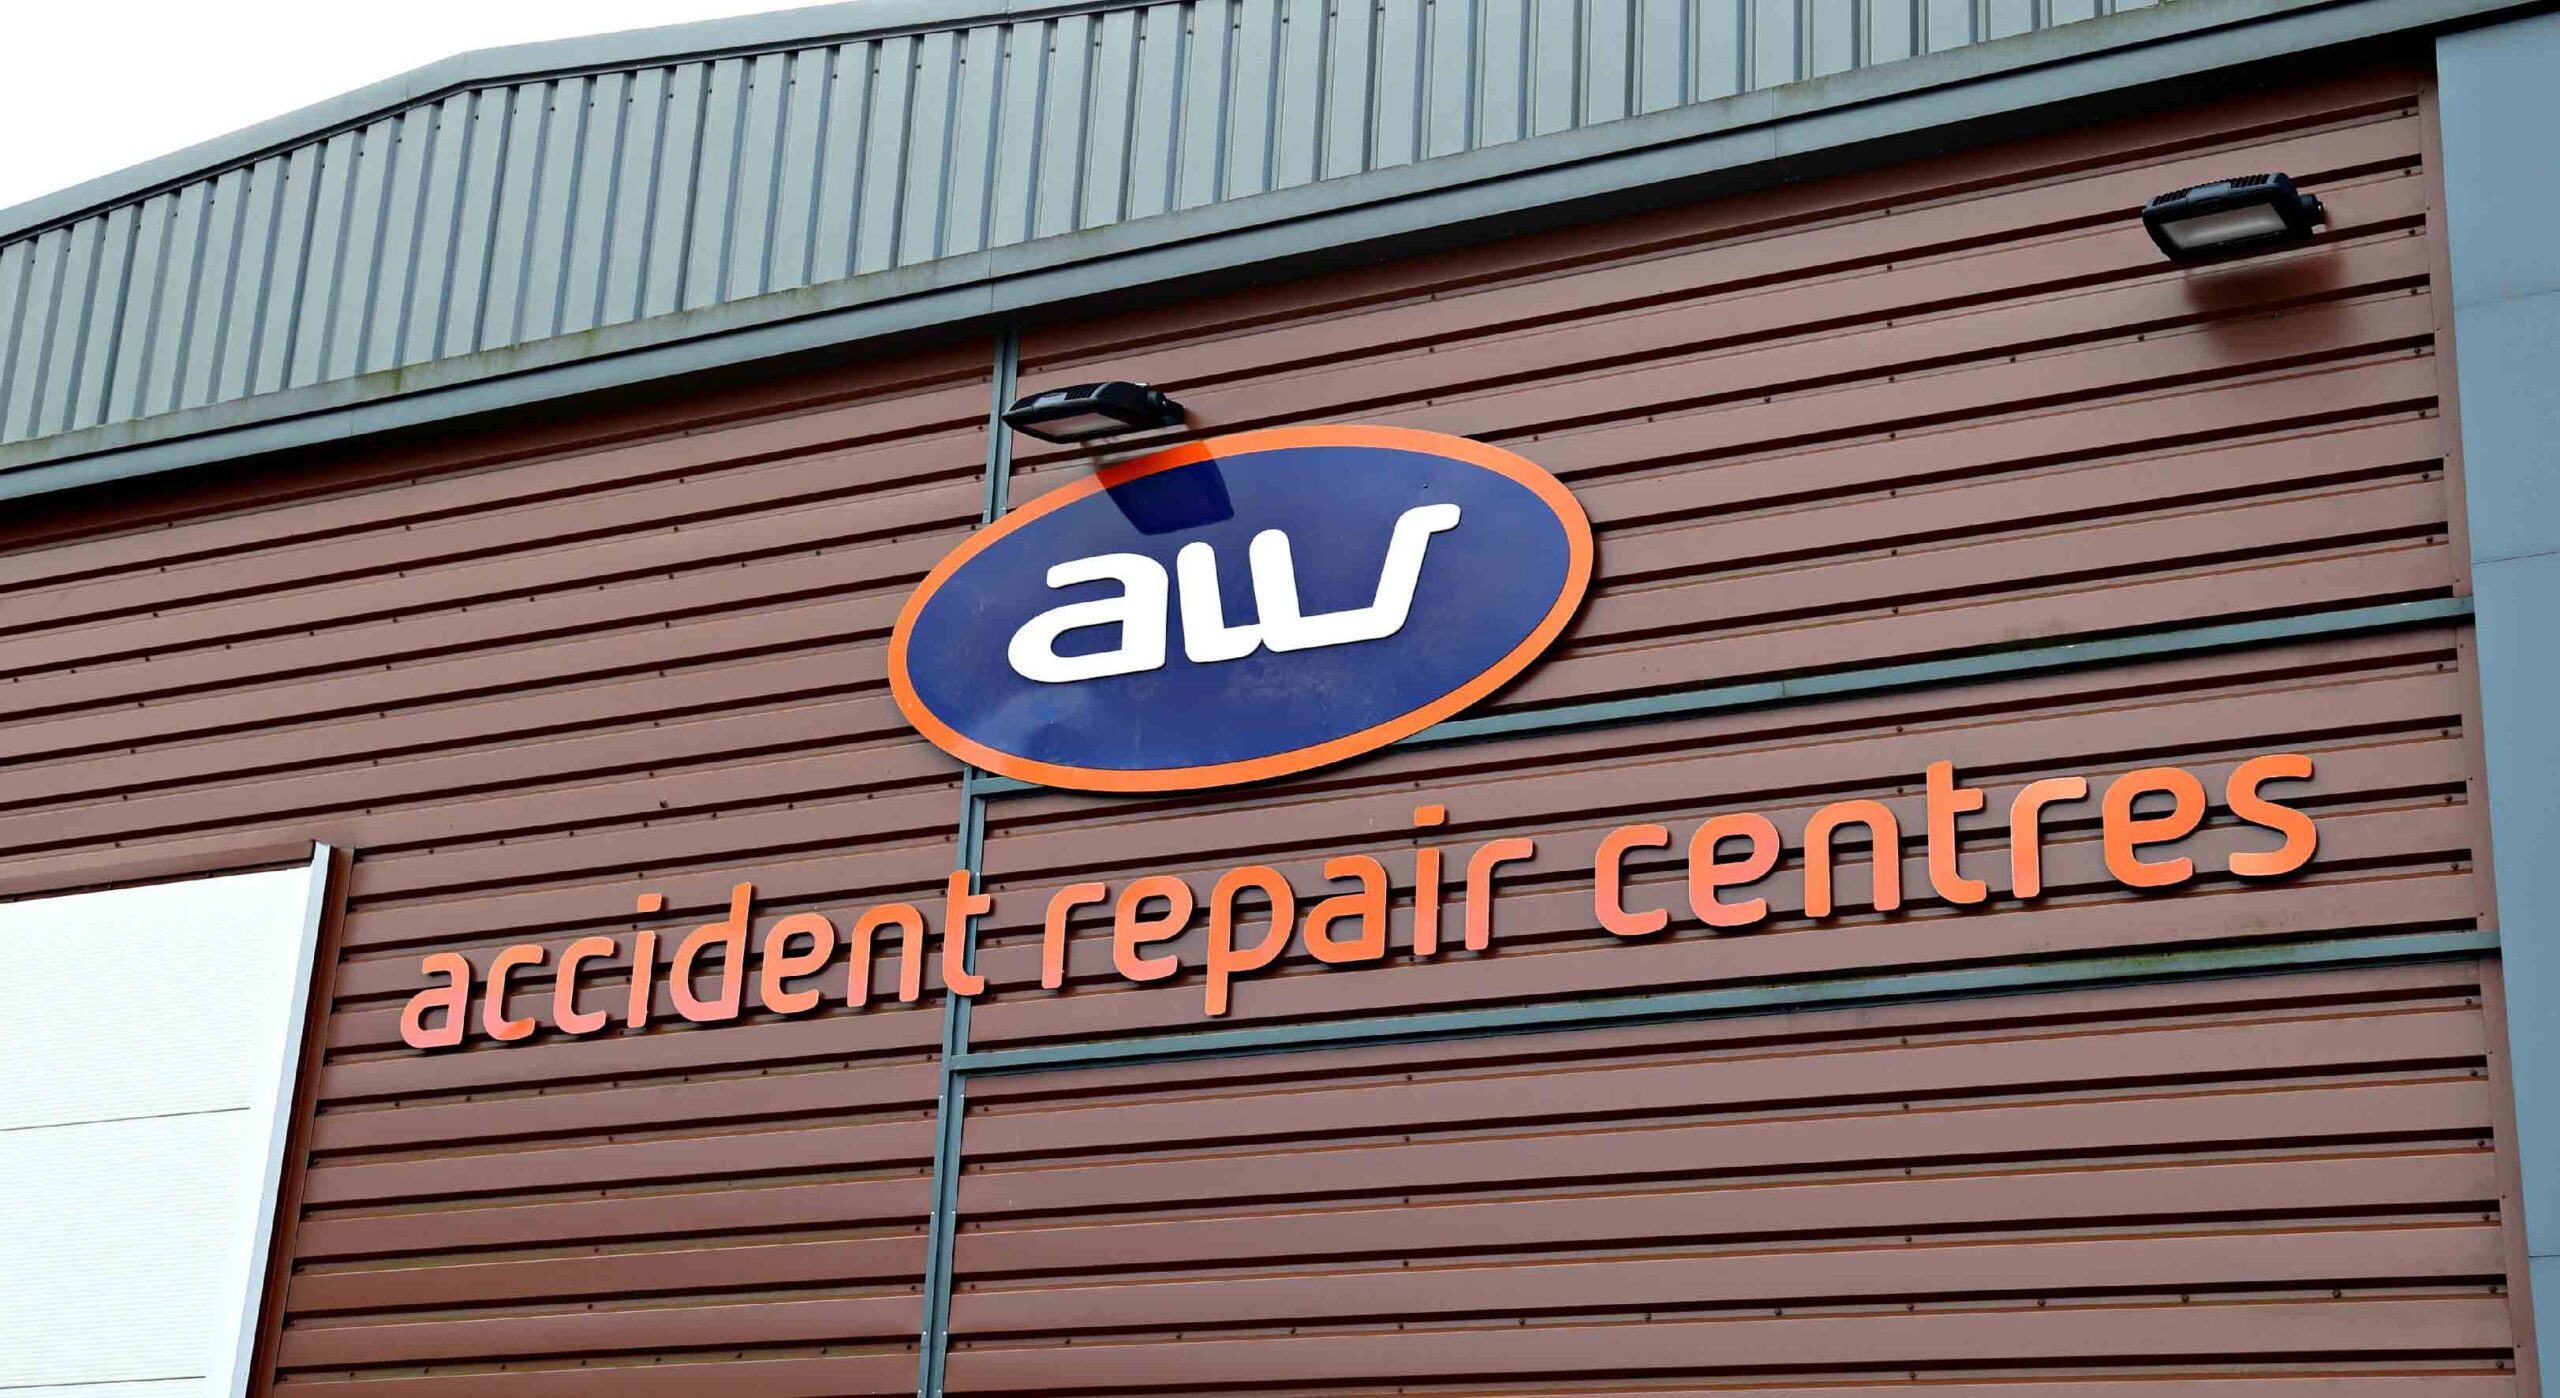 Image of the building with AW Repair logo